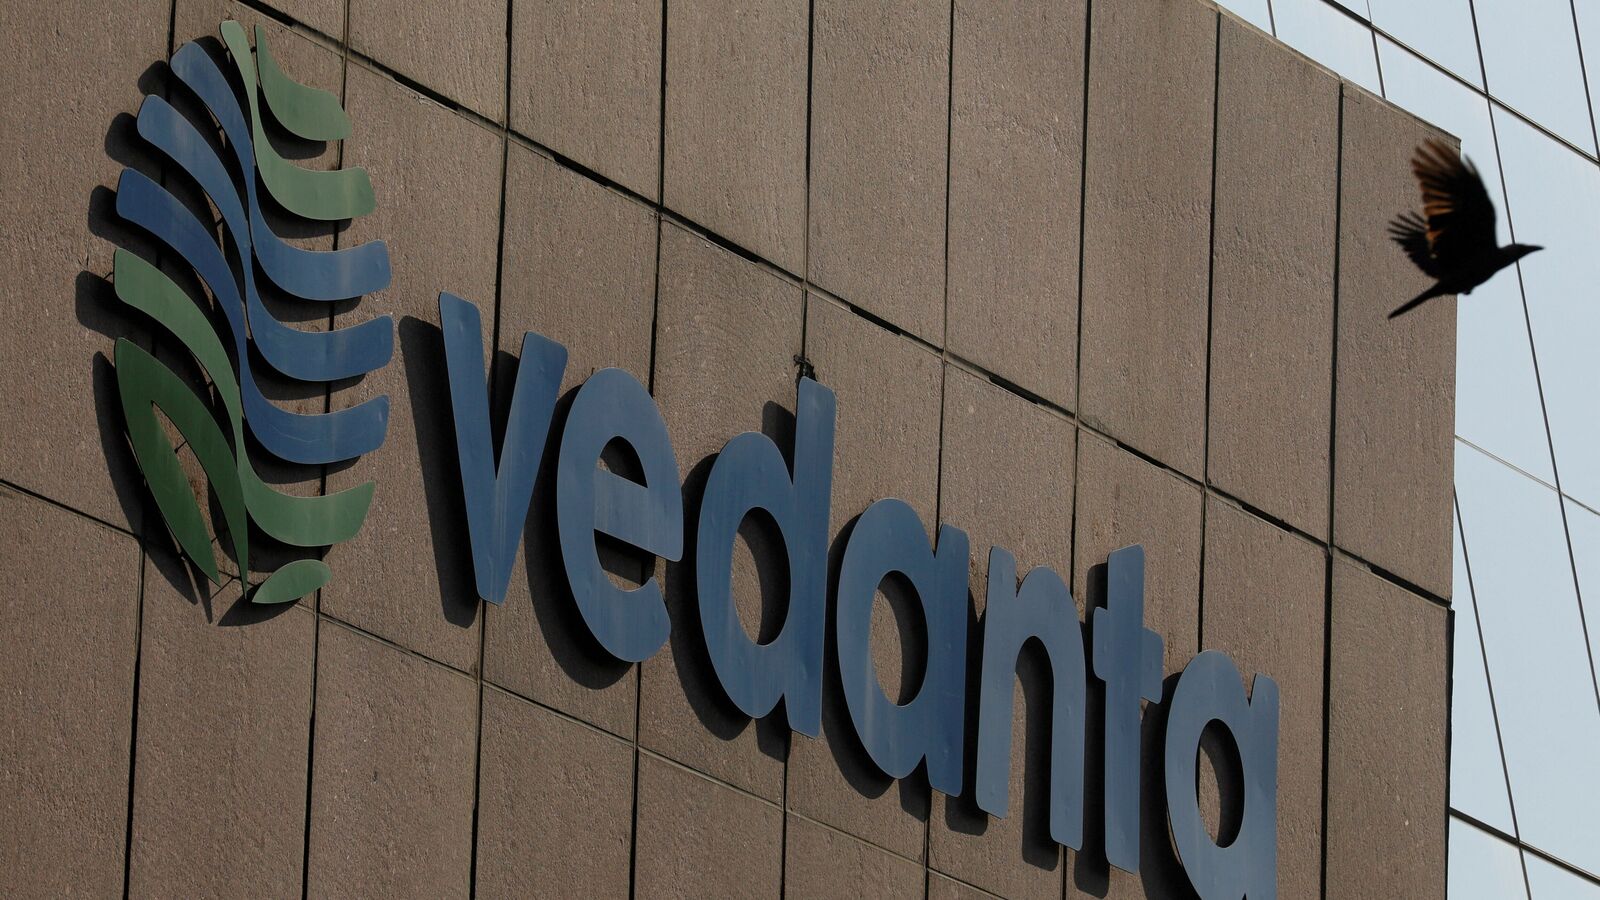 Vedanta’s cost cut push is good, but some concerns linger